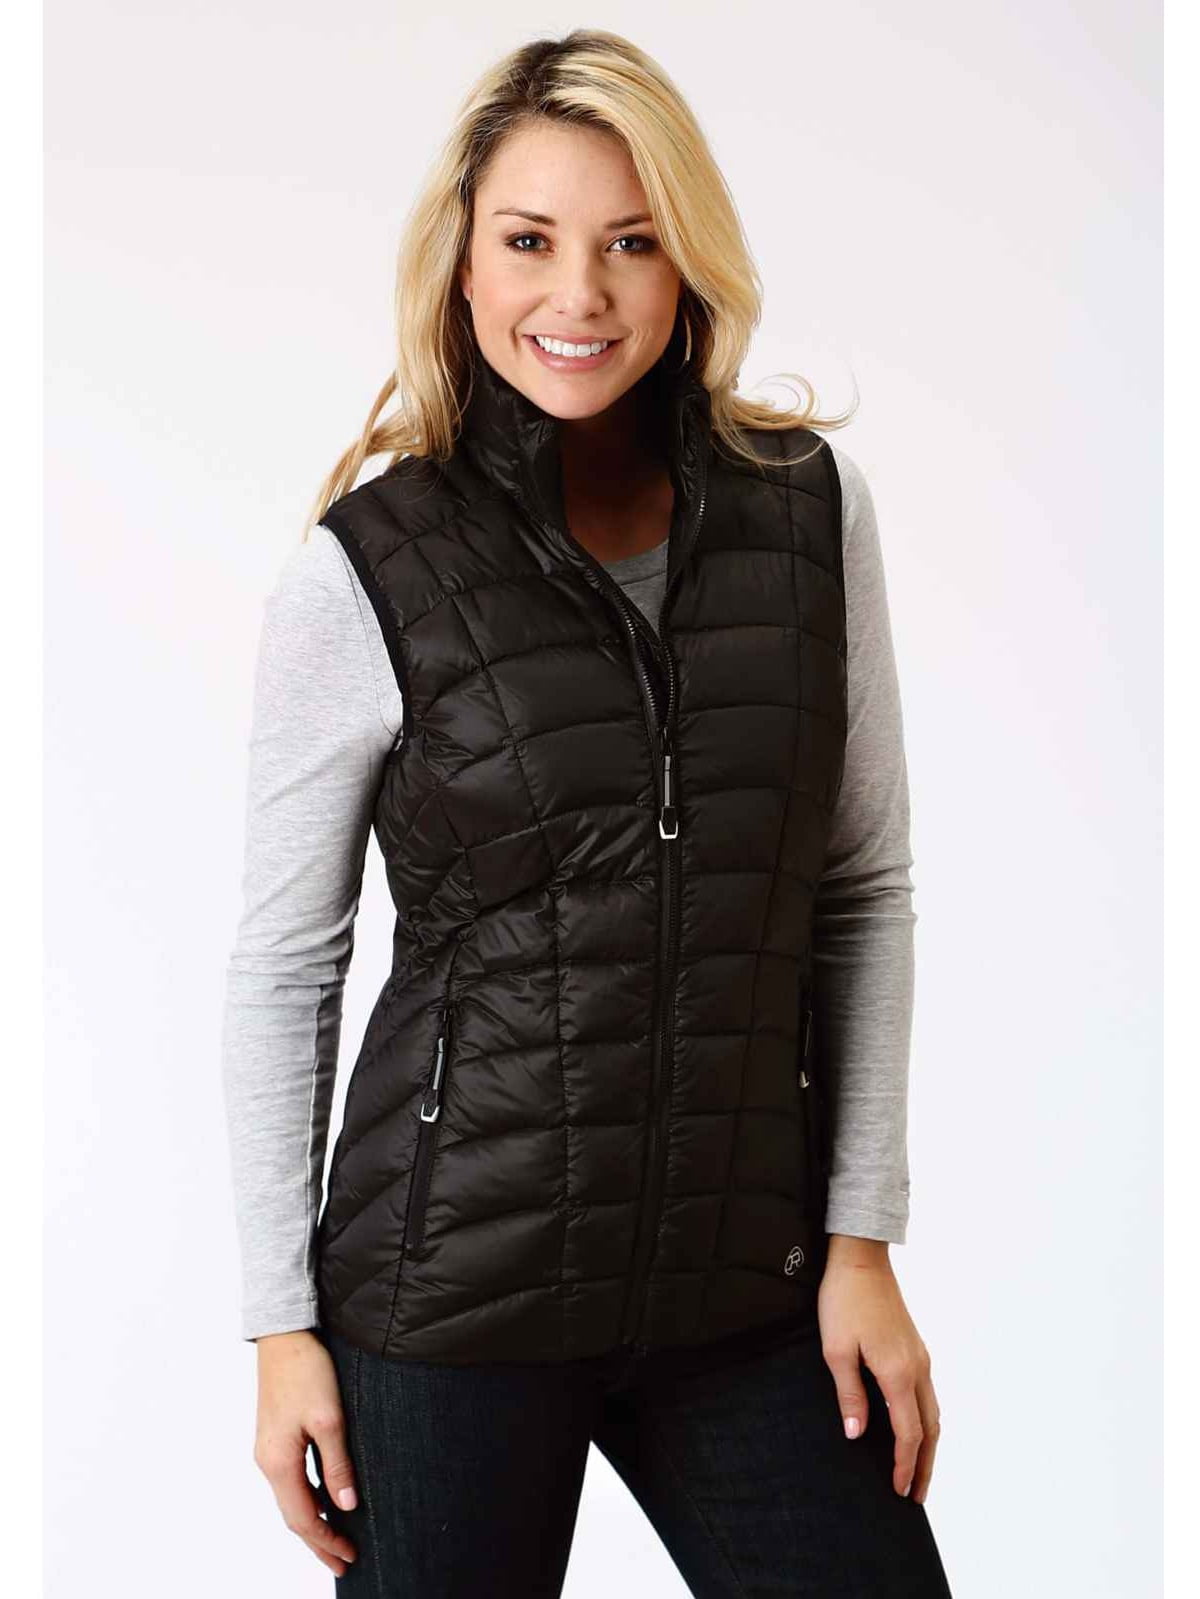 Roper Solid Nylon Quilted Vest Outerwear Girls